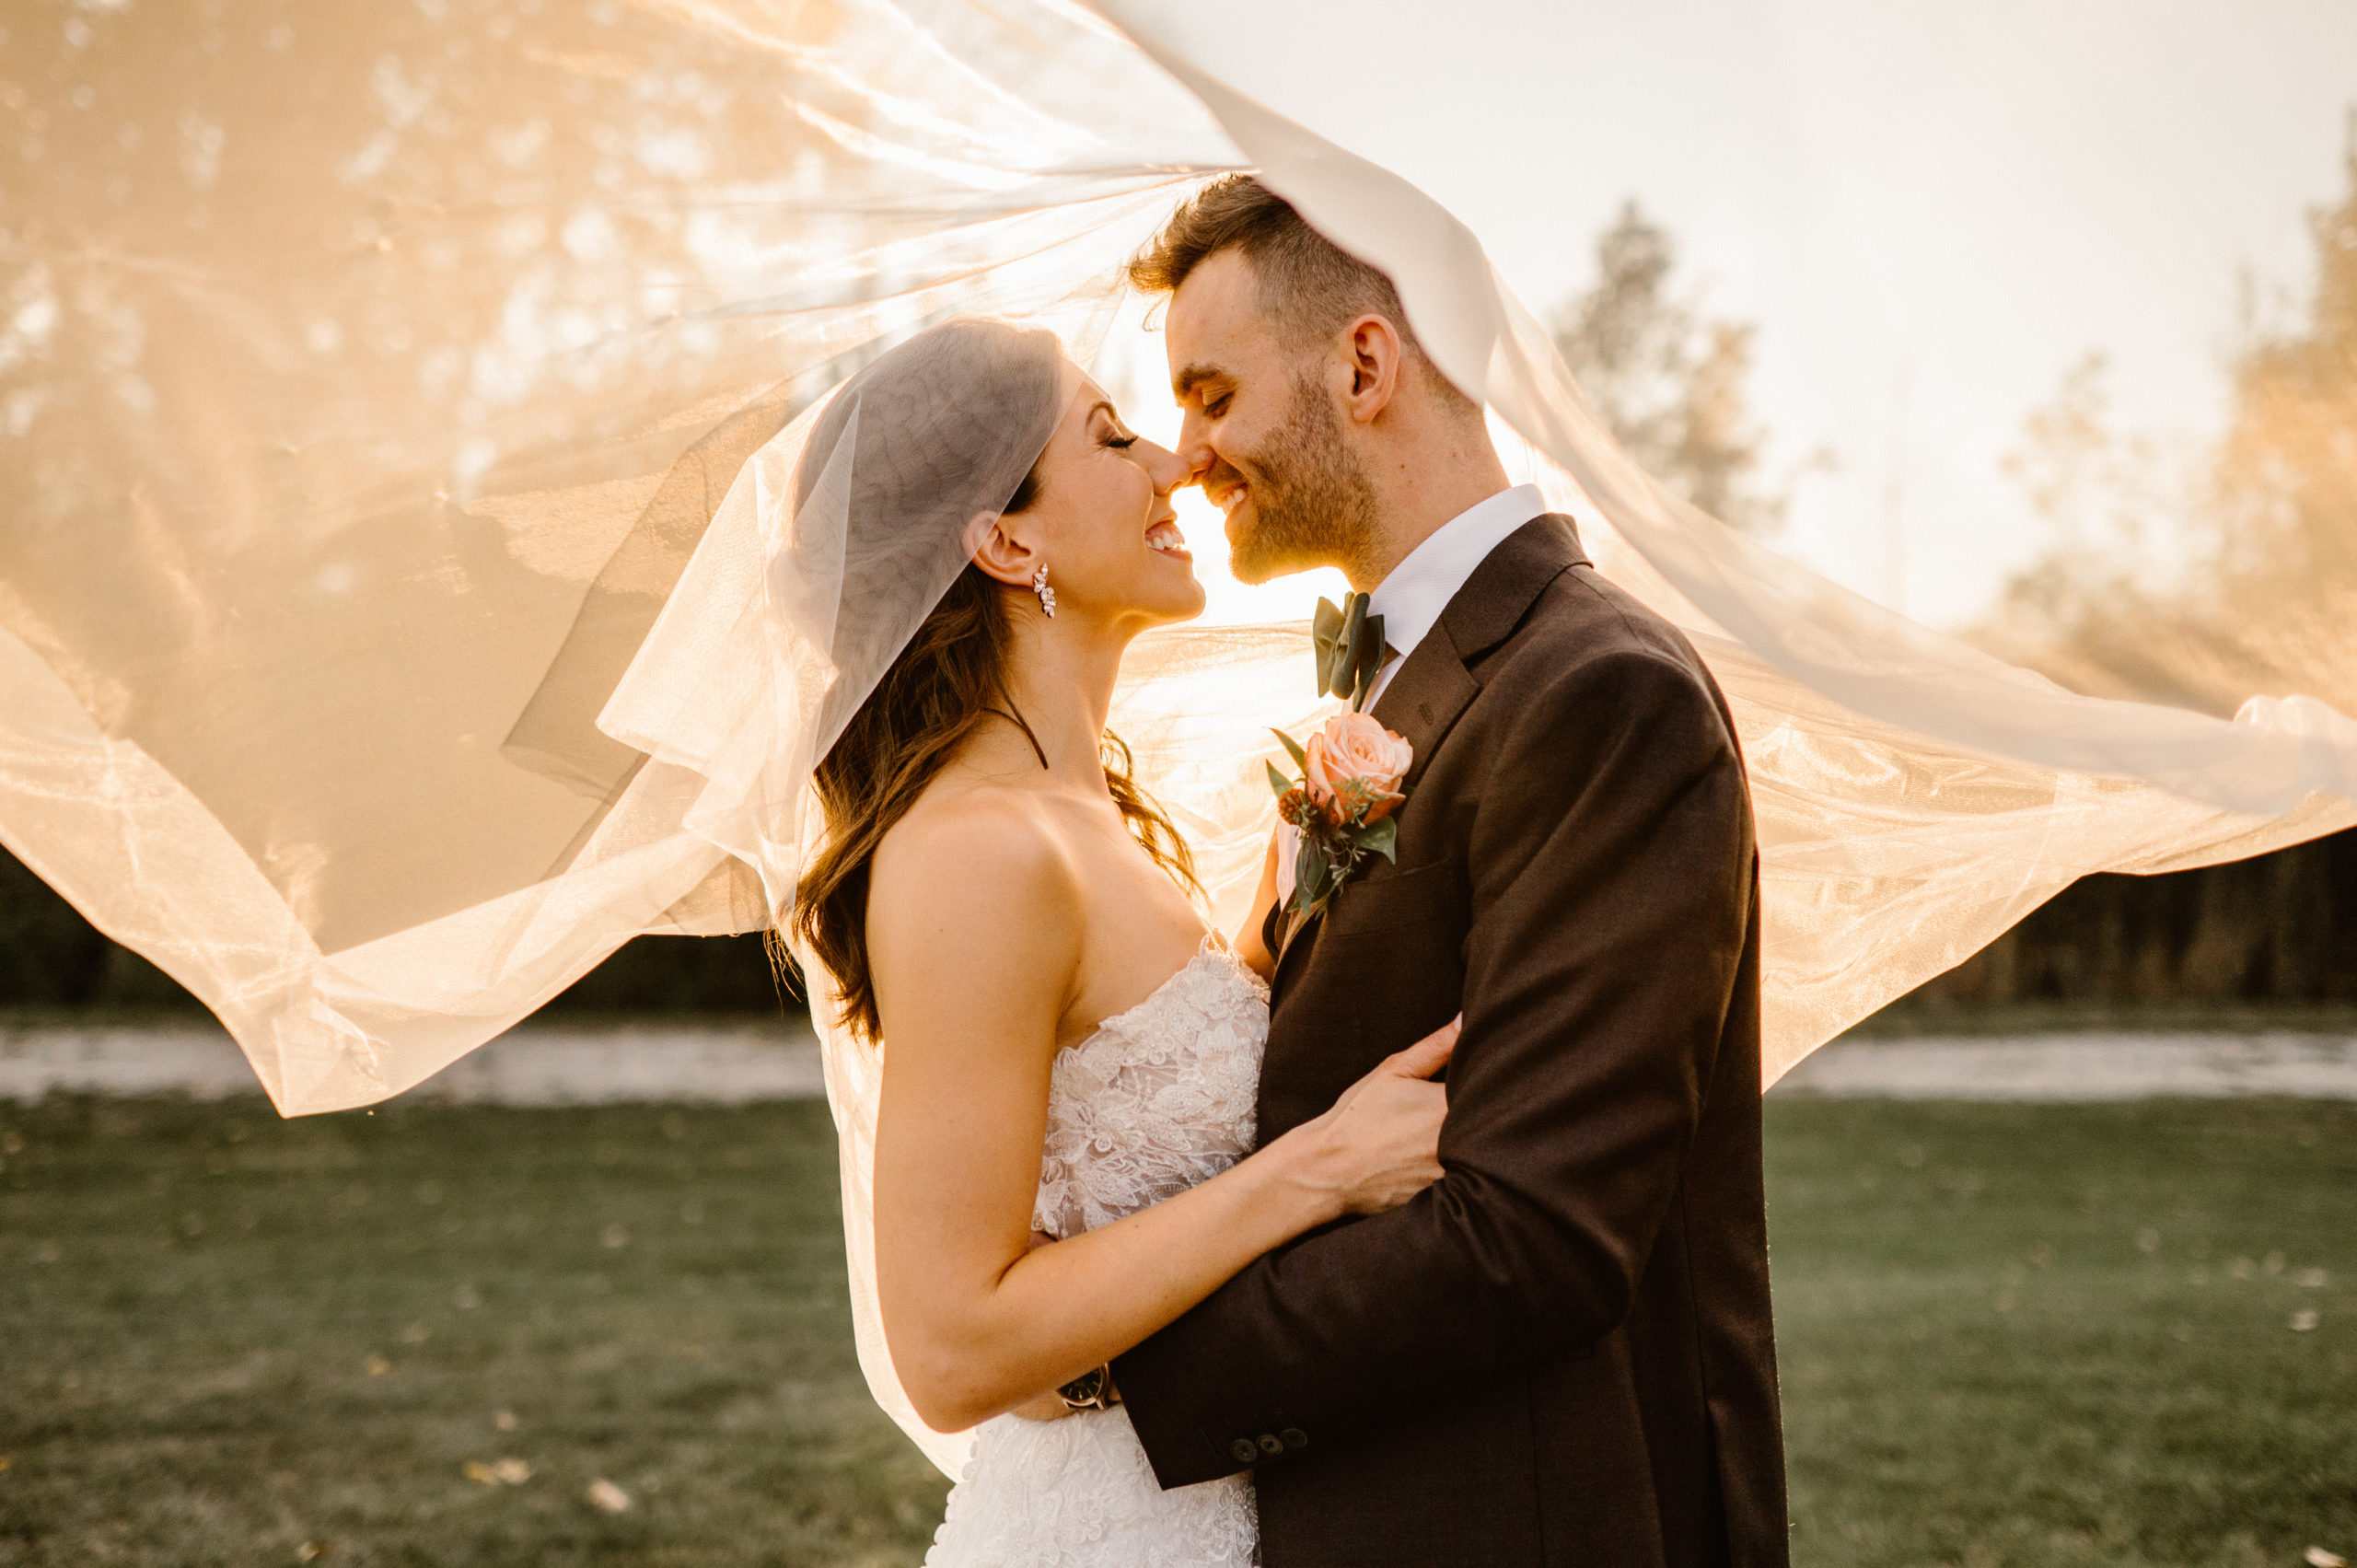 Capturing Everlasting Moments: The Function of a Wedding Photographer